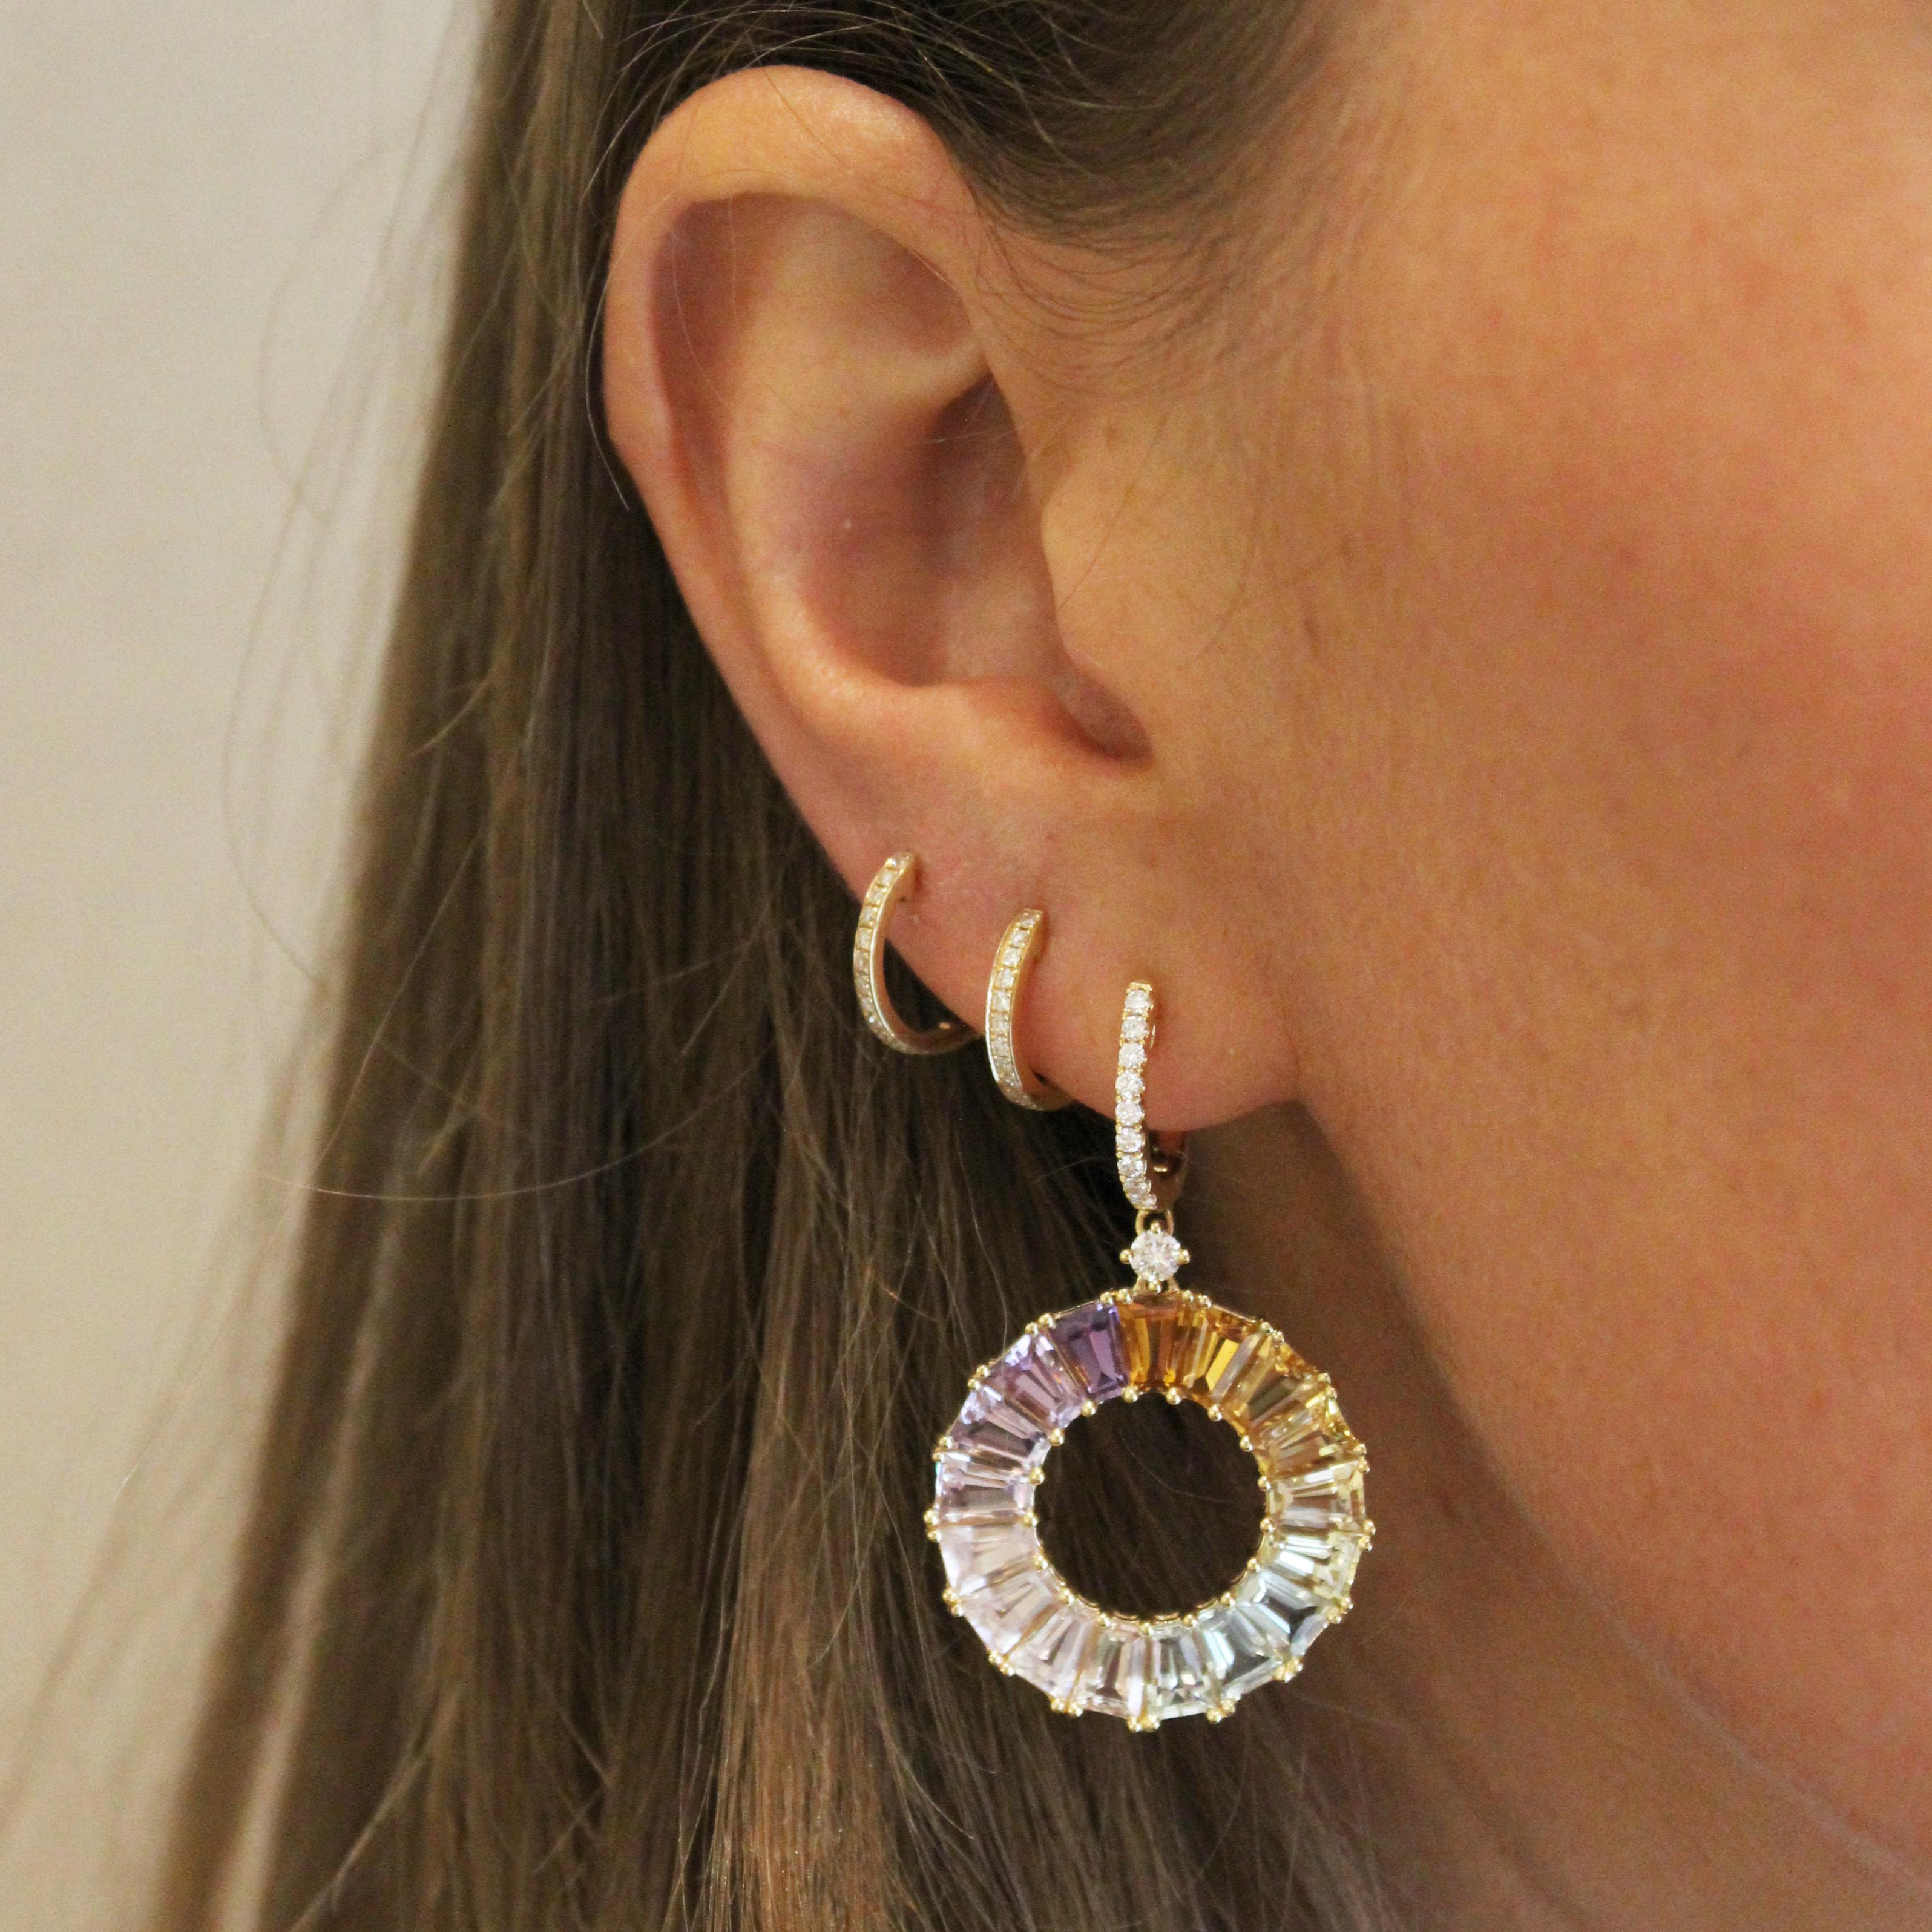 These stunning Rainbow earrings are modern and colourful, making them perfect to wear from day to night. They are set in 18 carat Yellow Gold and feature stones (11.41ct) including Lemon Quartz, Amethyst, Lavender Amethyst, White Topaz and Blue